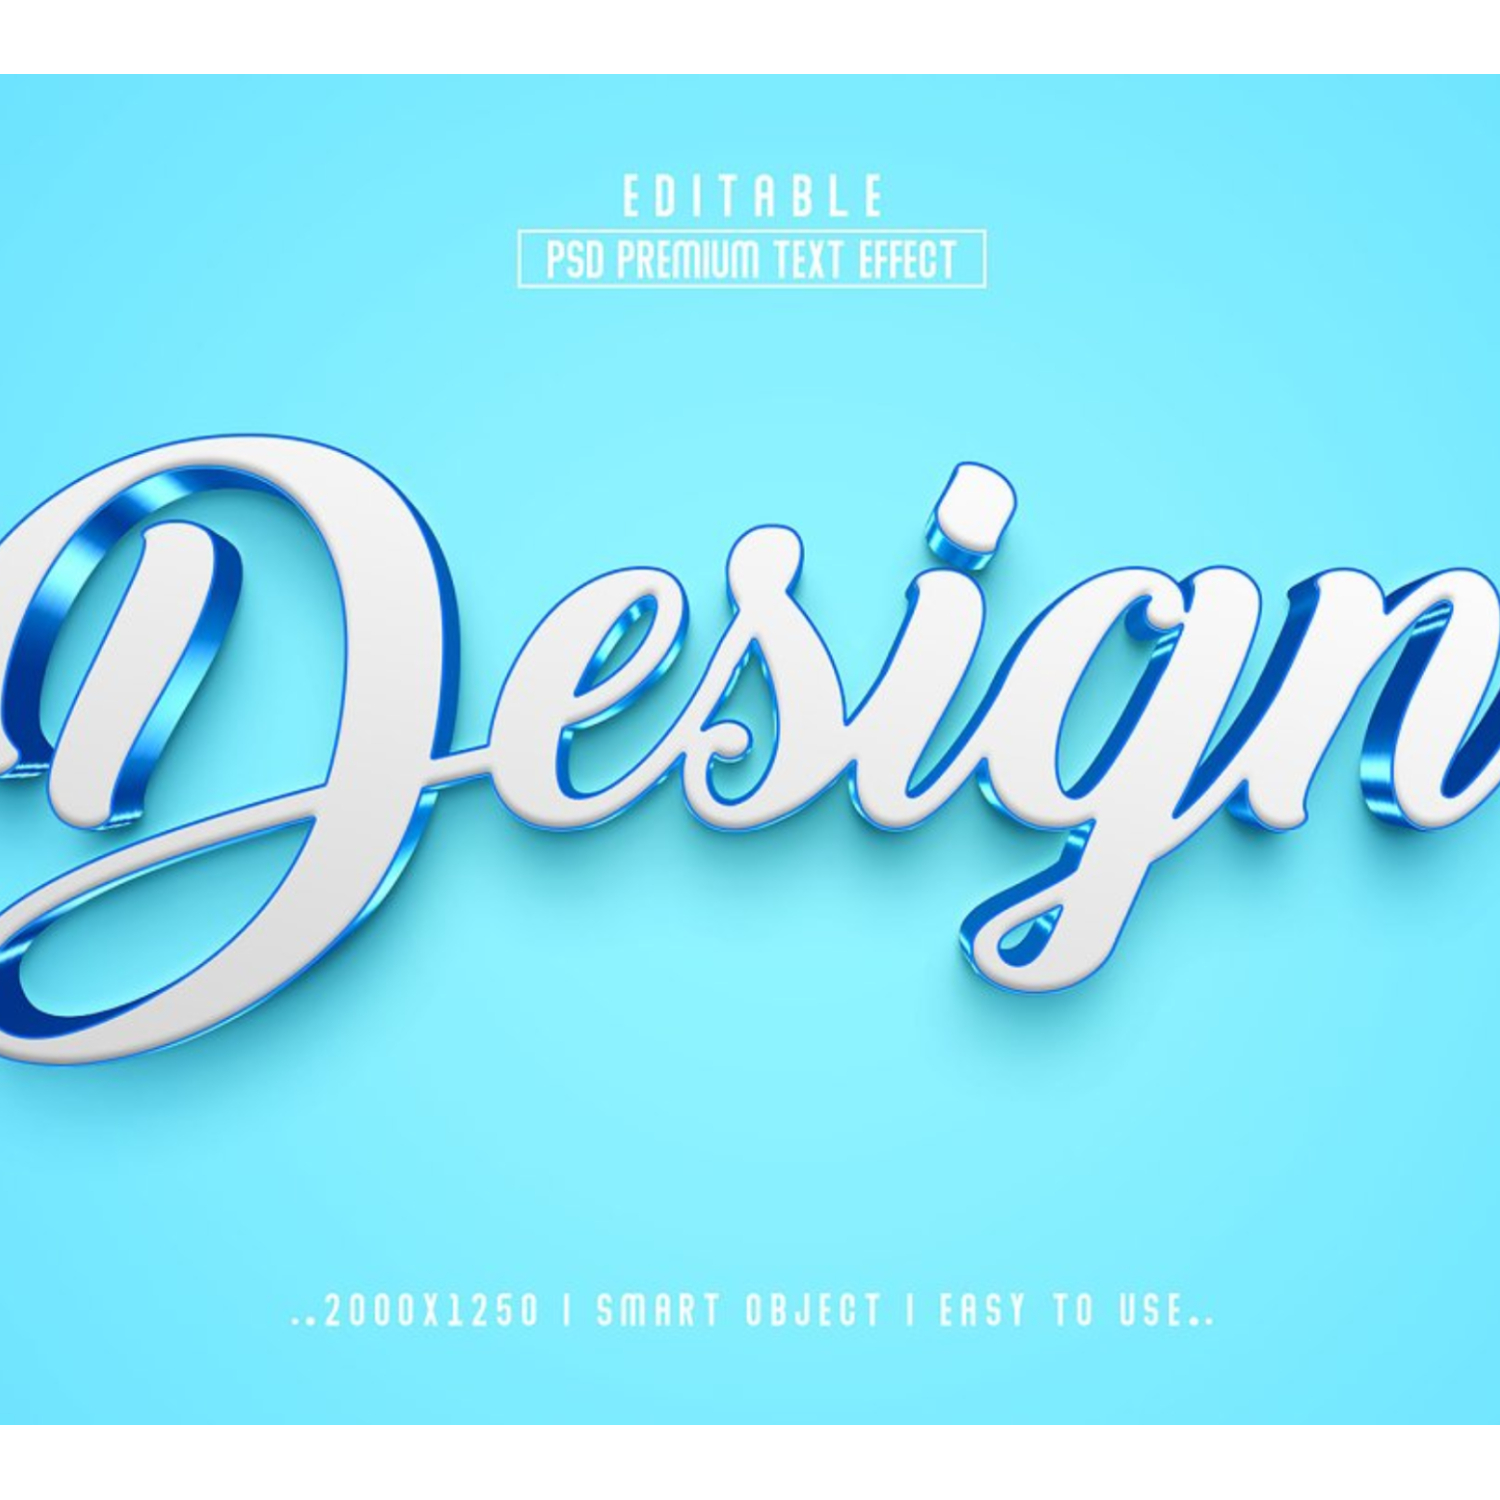 3d type of the word design on a blue background.